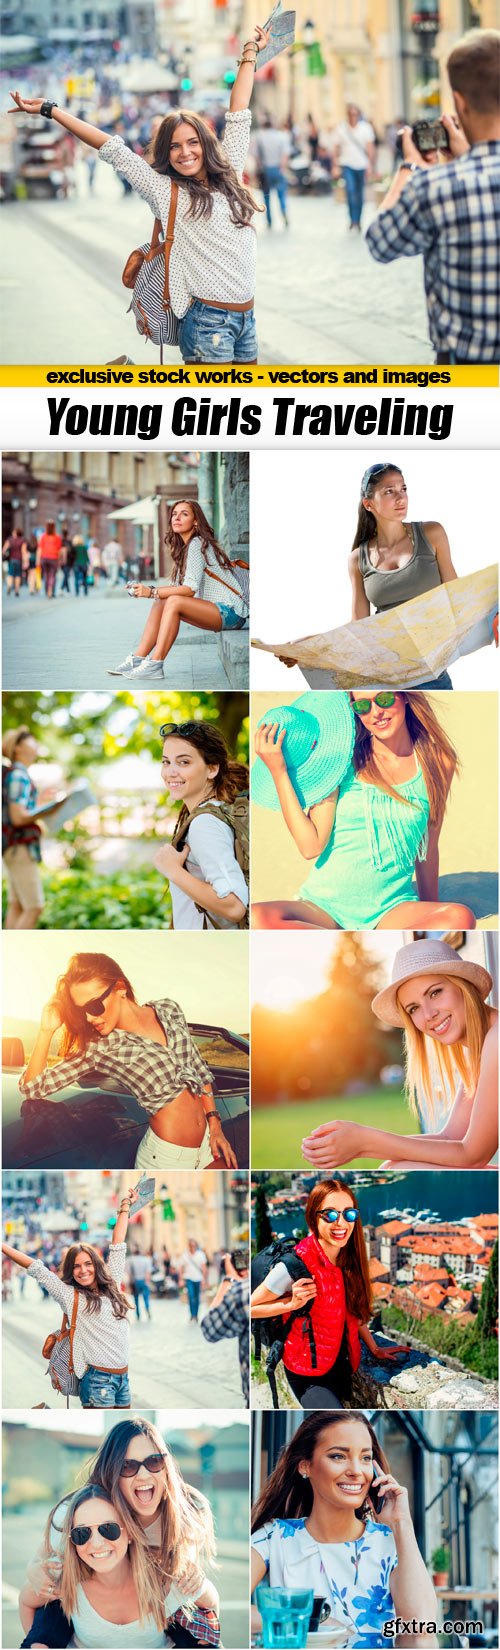 Young Girls Traveling - 10x JPEGs